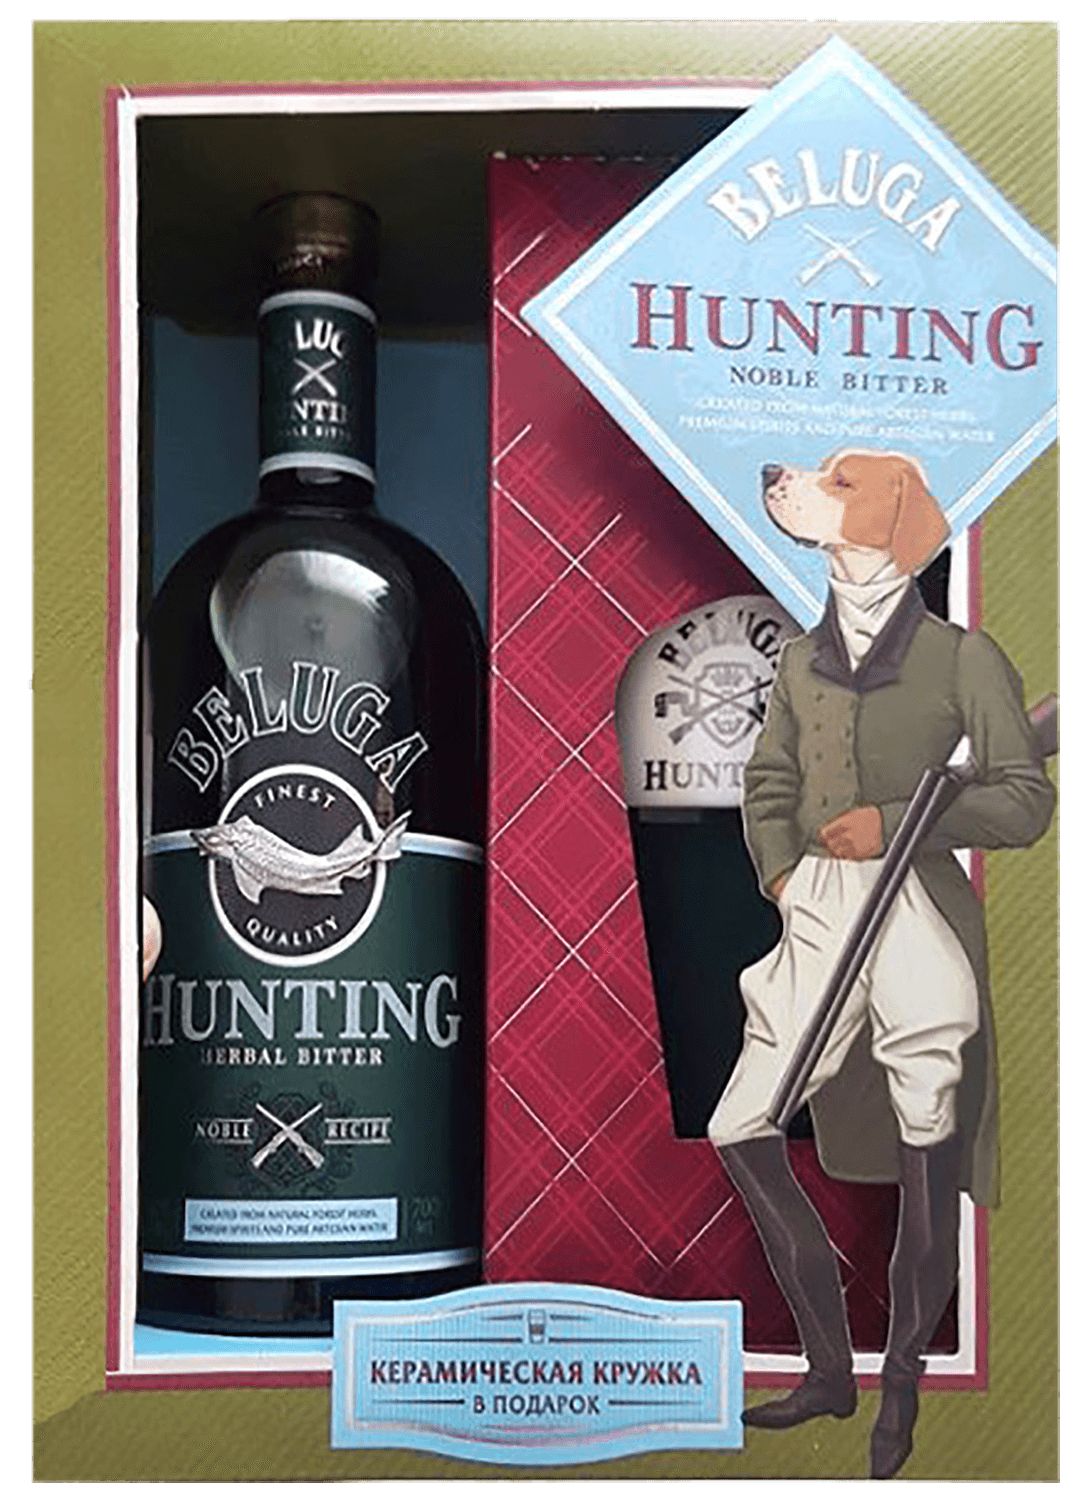 Beluga Hunting Herbal Bitter (gift box with a flask) beluga hunting herbal bitter gift box with a glass